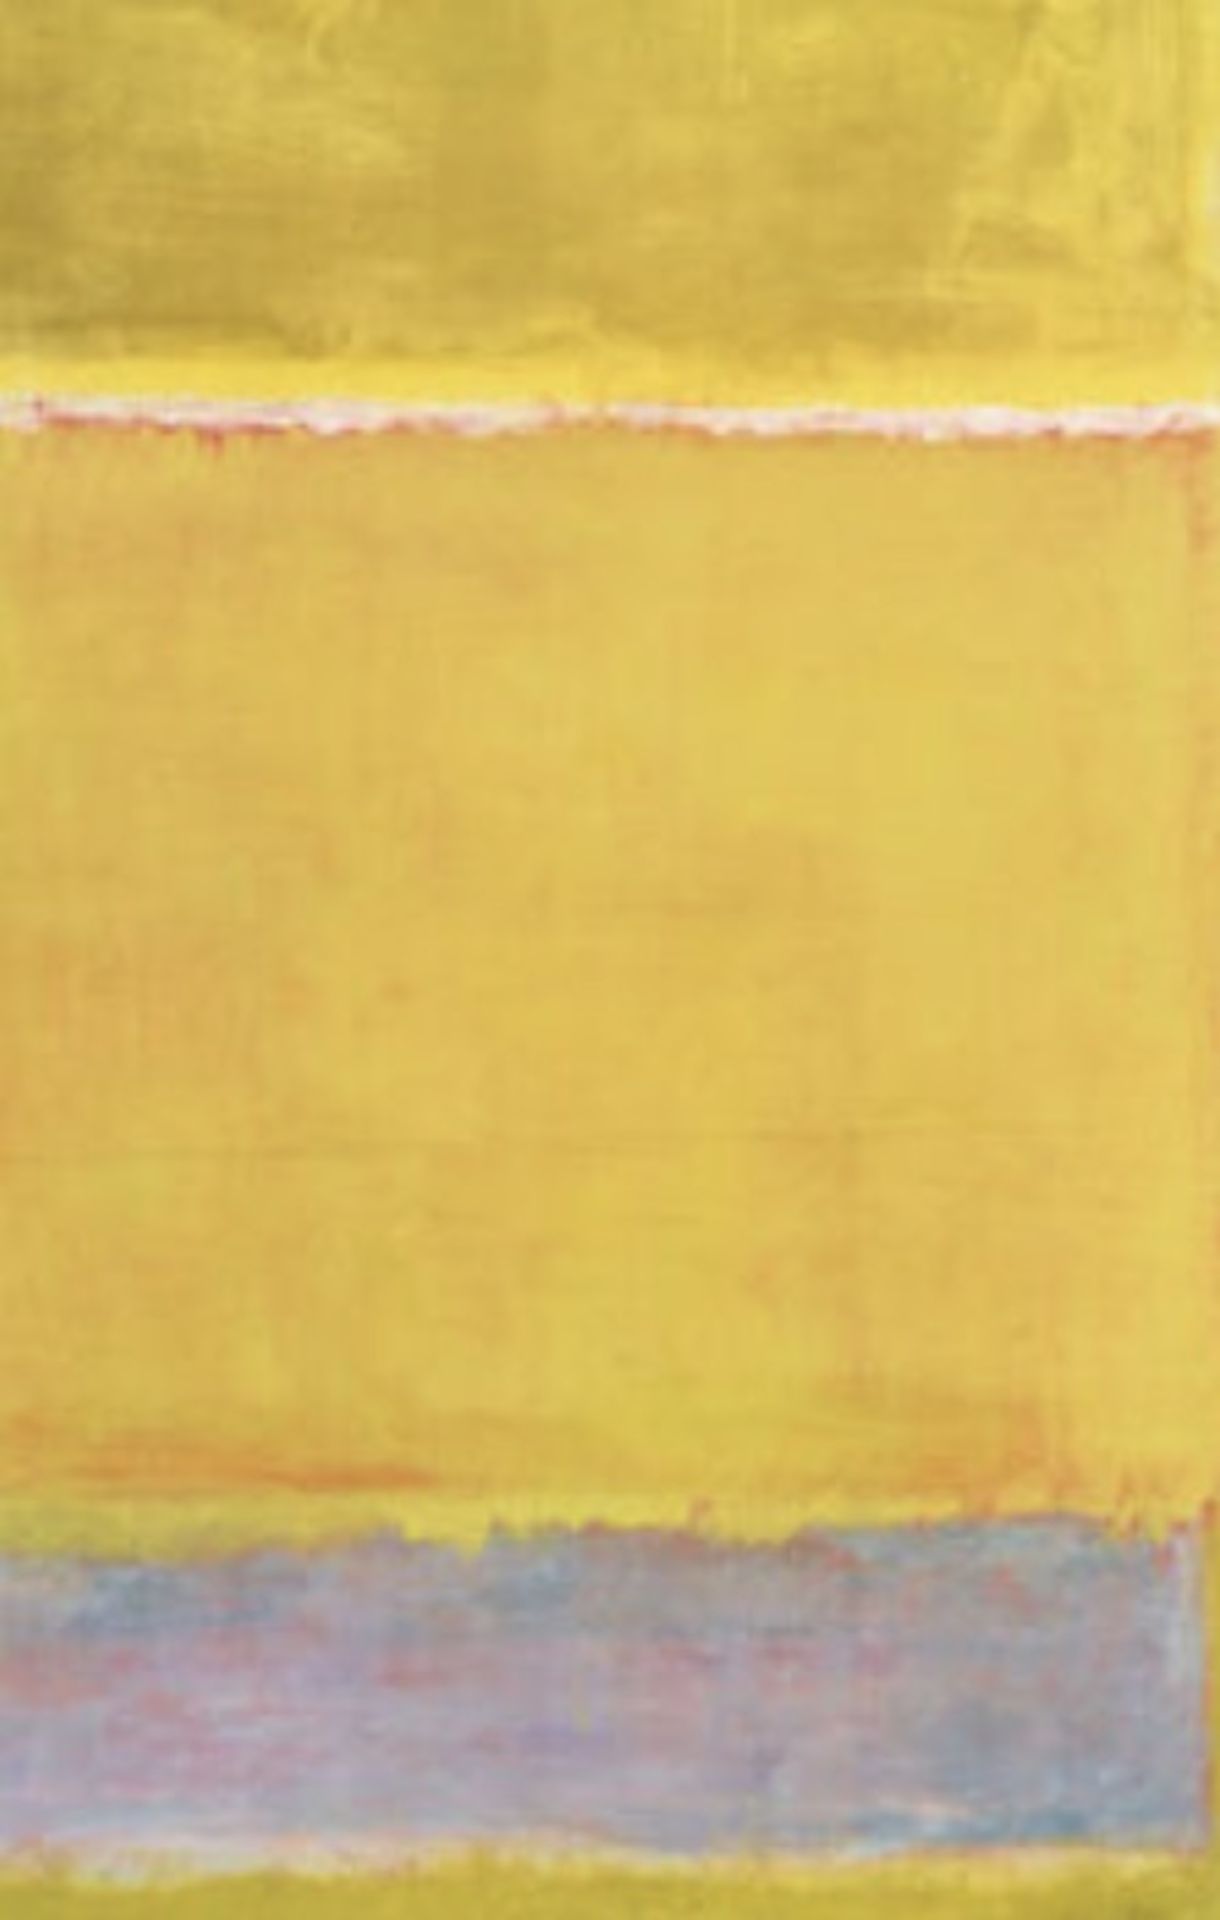 Mark Rothko "Yellow" Offset Lithograph - Image 5 of 5